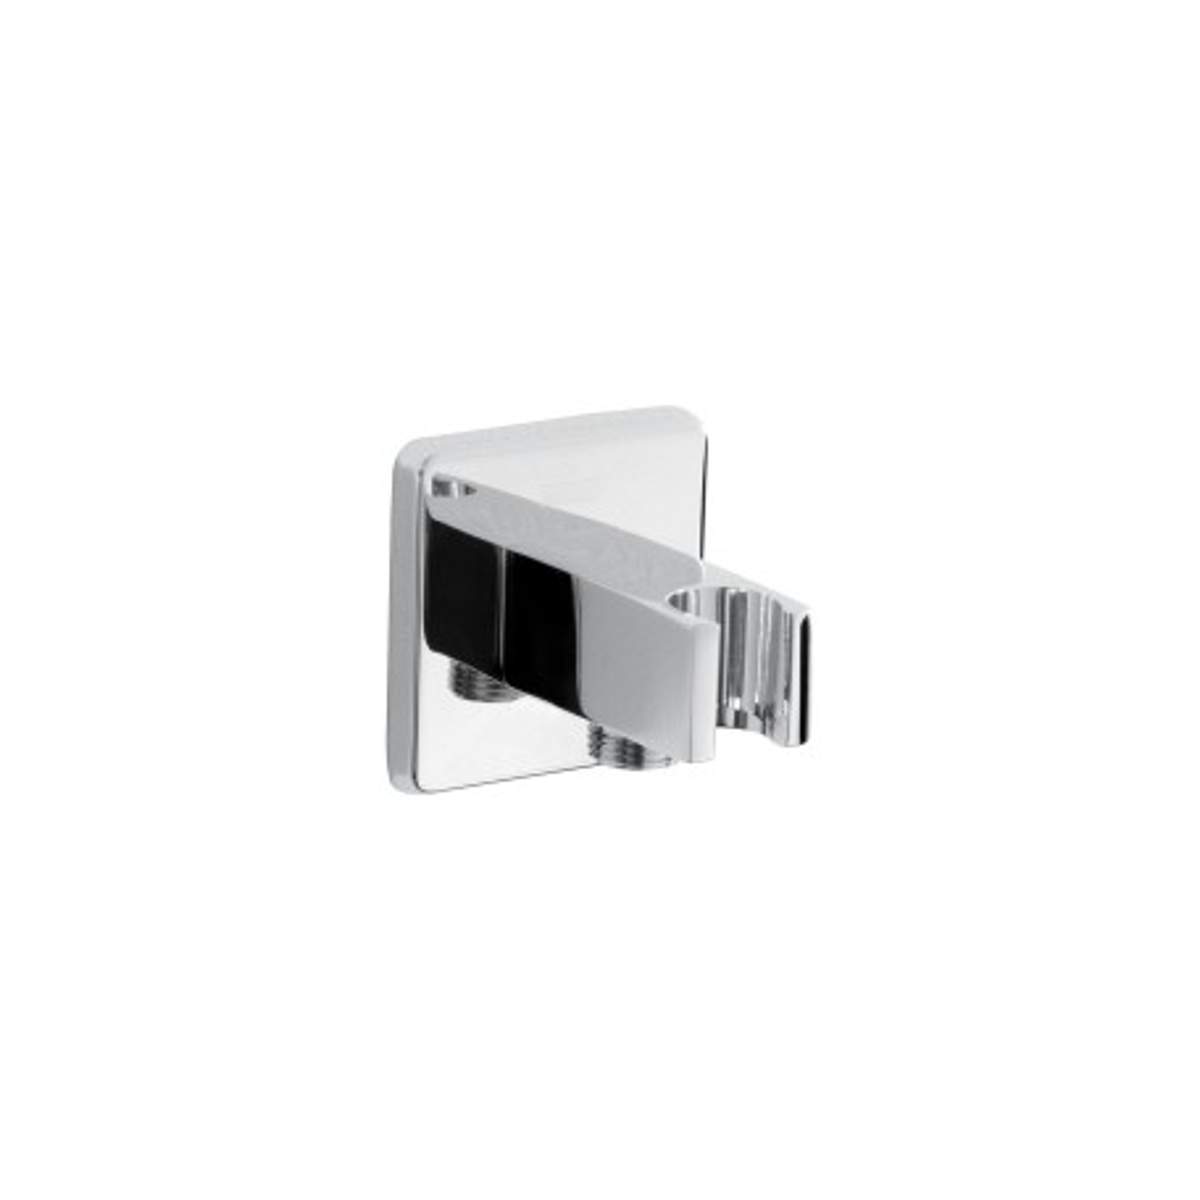 Bristan Contemporary Square Wall Outlet with Handset Holder Bracket (C WOSQ02 C)